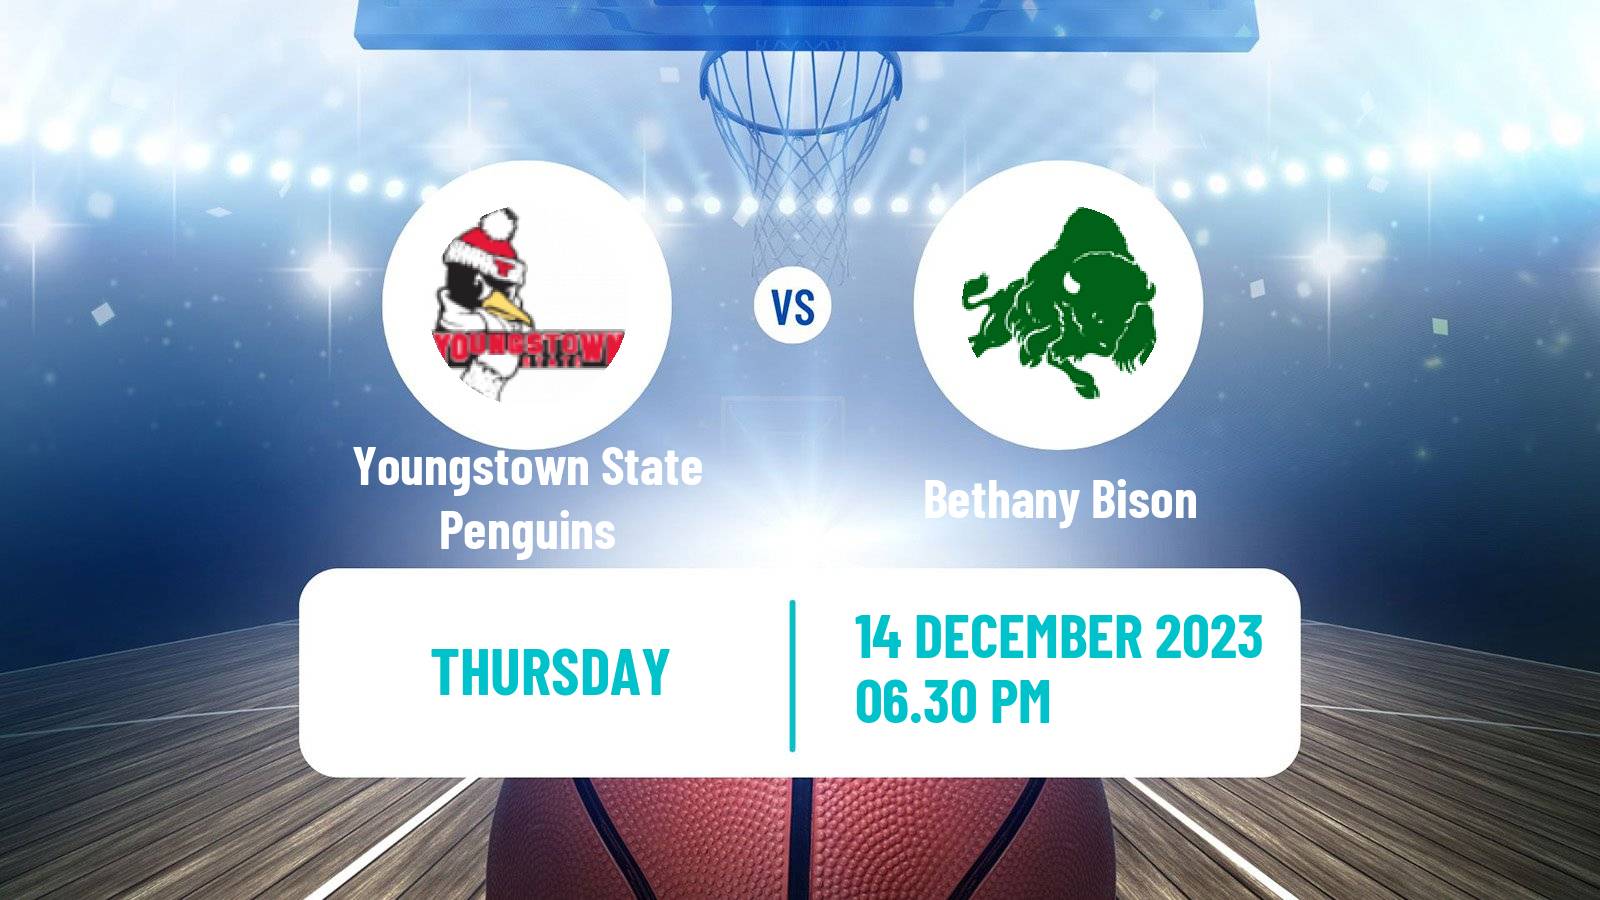 Basketball NCAA College Basketball Youngstown State Penguins - Bethany Bison